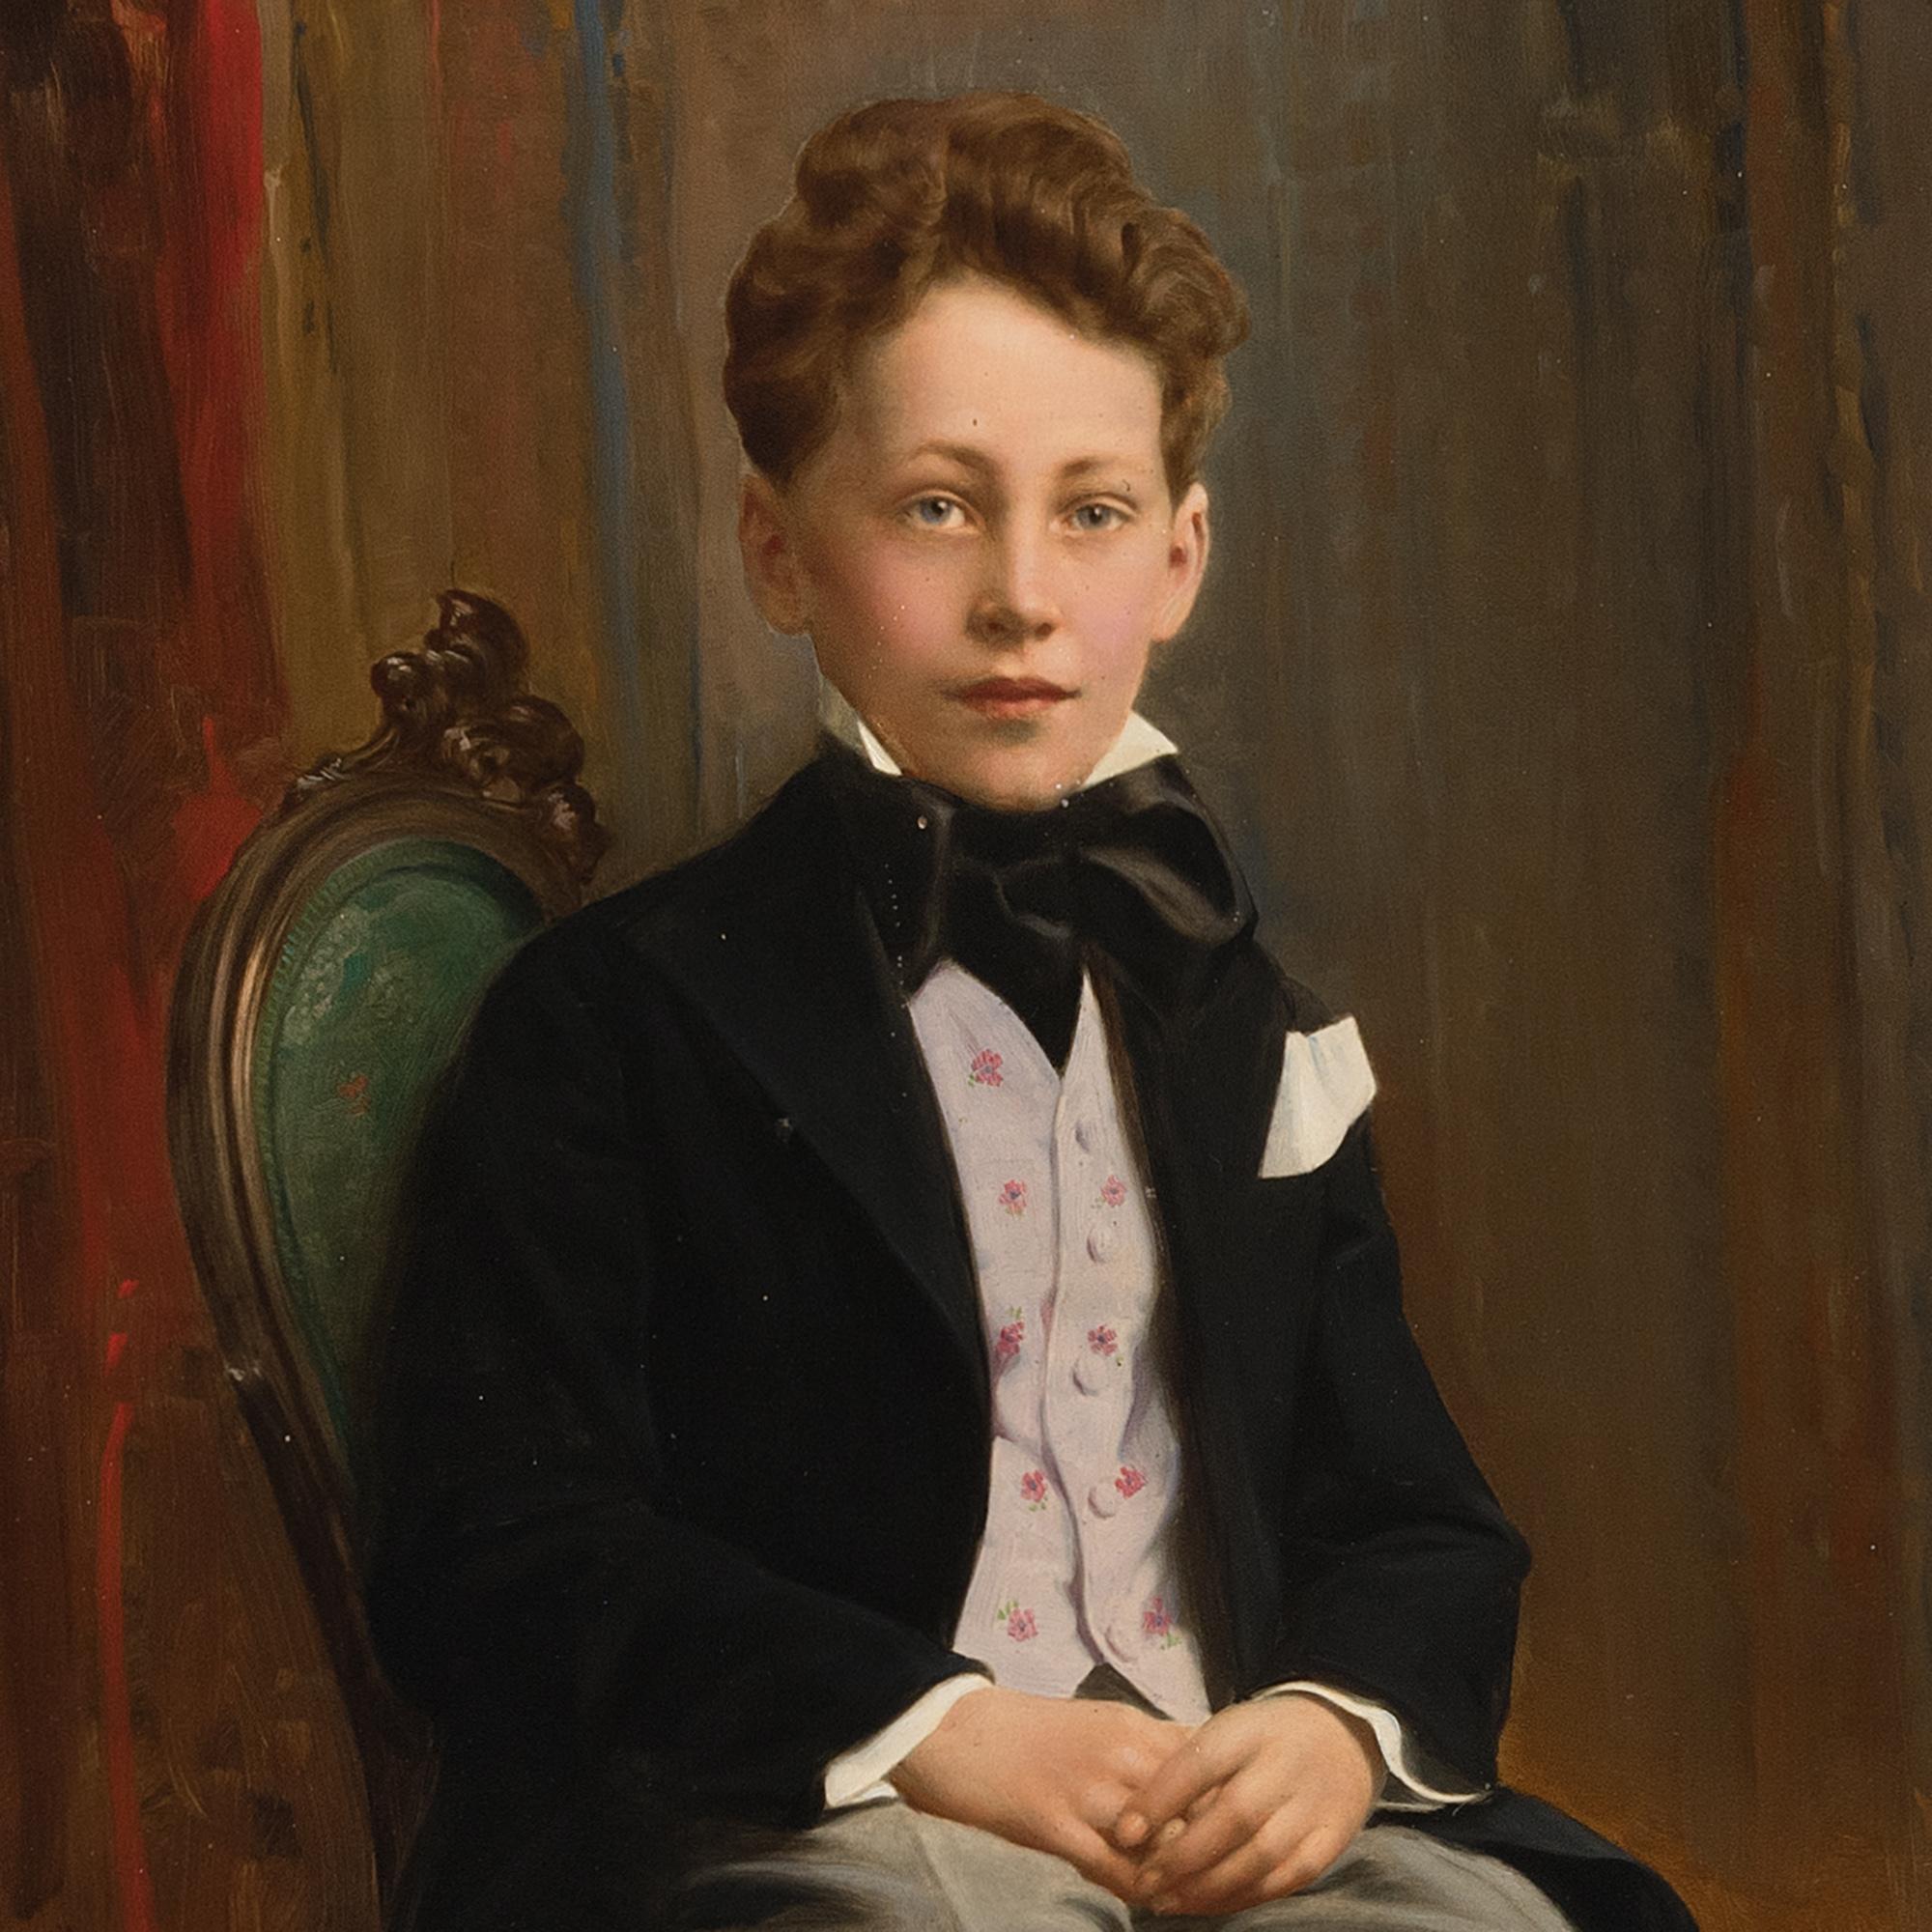 A wonderful 1930s portrait of Günther, a smart young gentleman wearing a coat, black bowtie, lilac waistcoat, and trousers. This beautiful piece is a very good example of a painted photograph and one of the finest we’ve discovered.

The portrait is